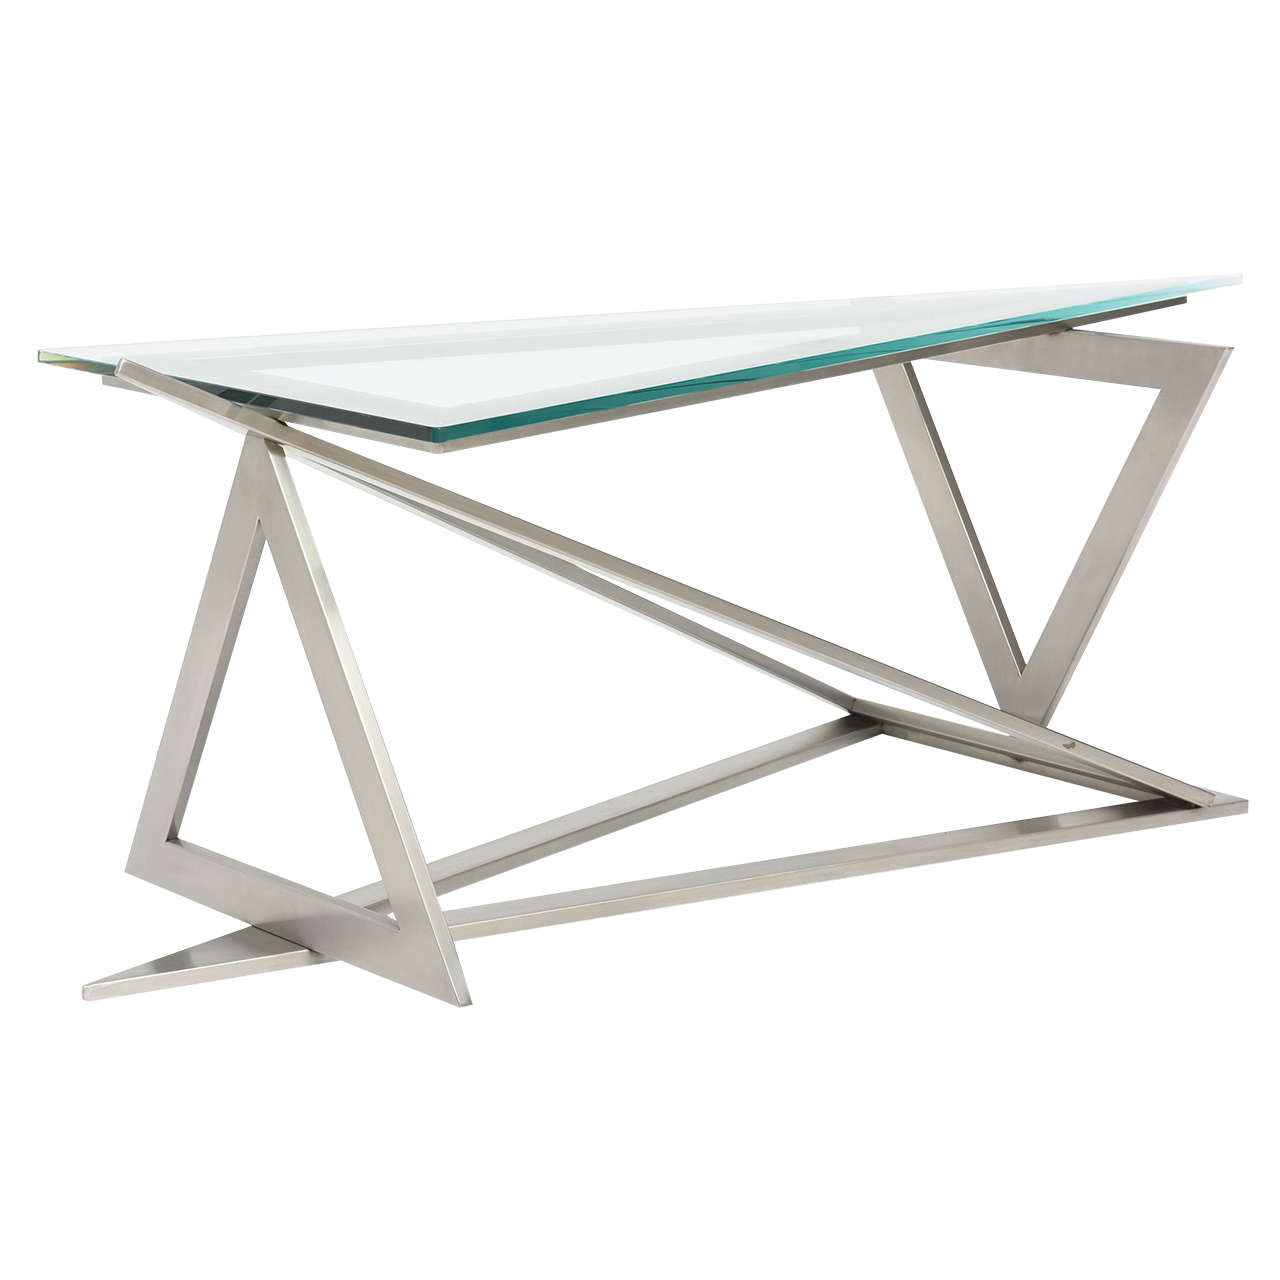 Italian Modern Stainless Steel and Glass Table Attributed to Giovanni Offredi For Sale